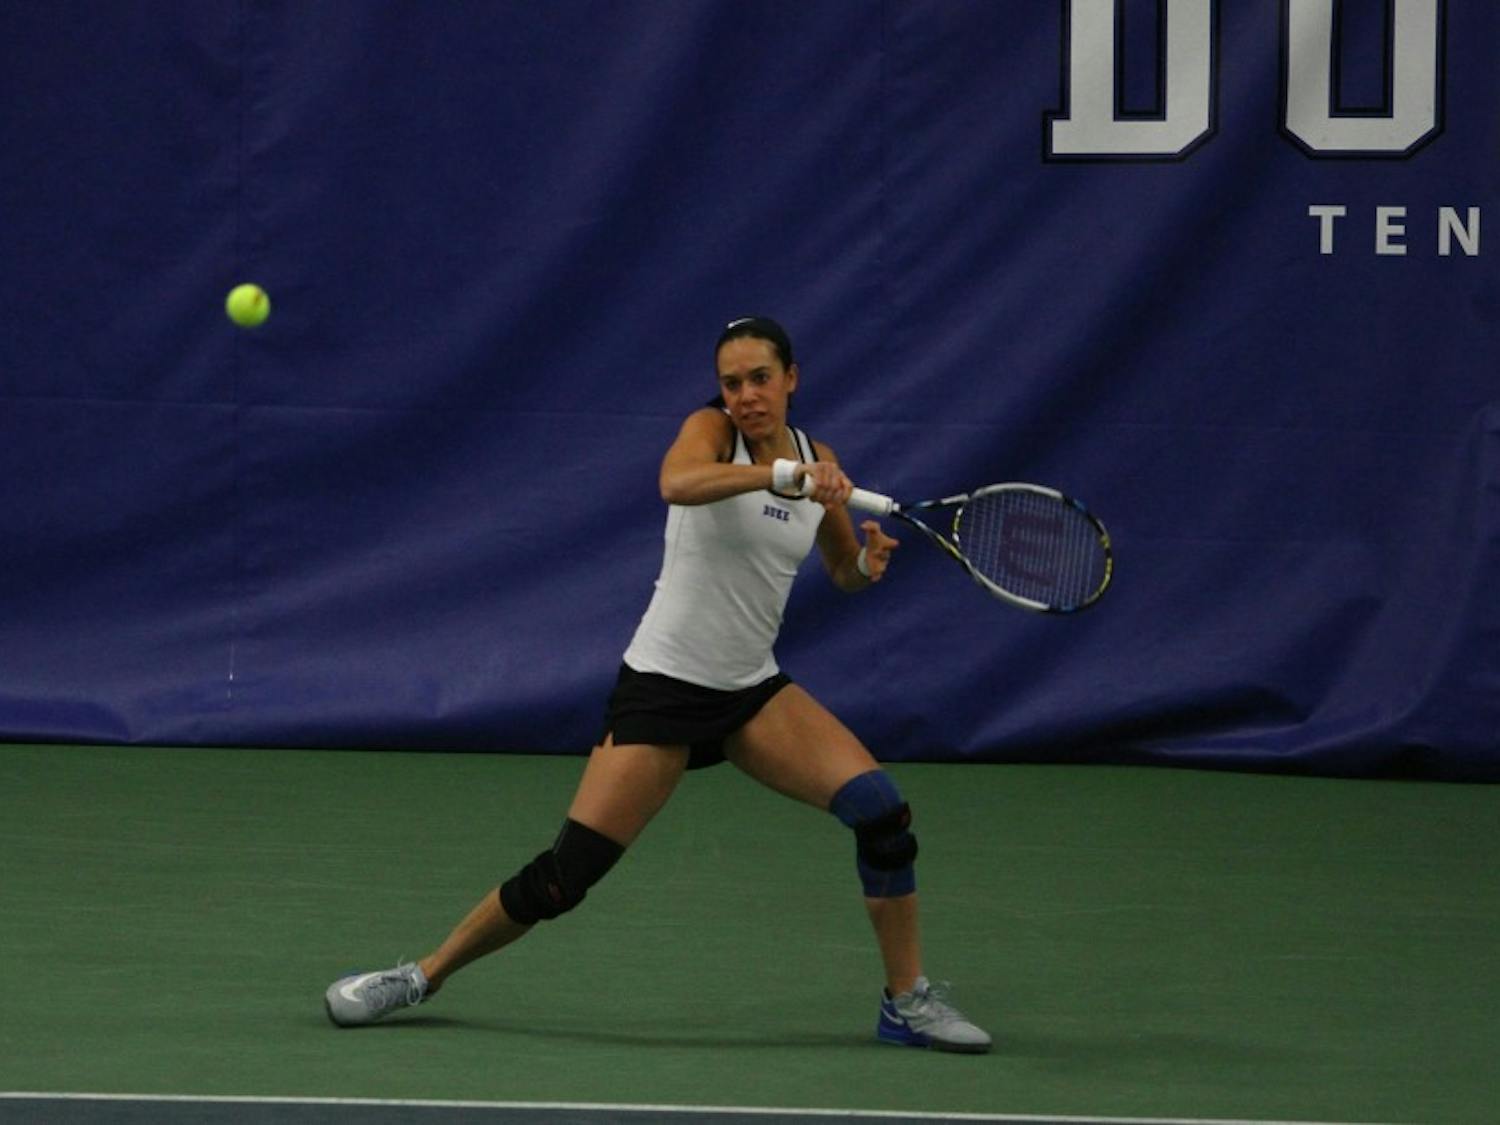 Junior Beatrice Capra is 3-3 in singles play this year and a combined 7-6 with three separate doubles partners.